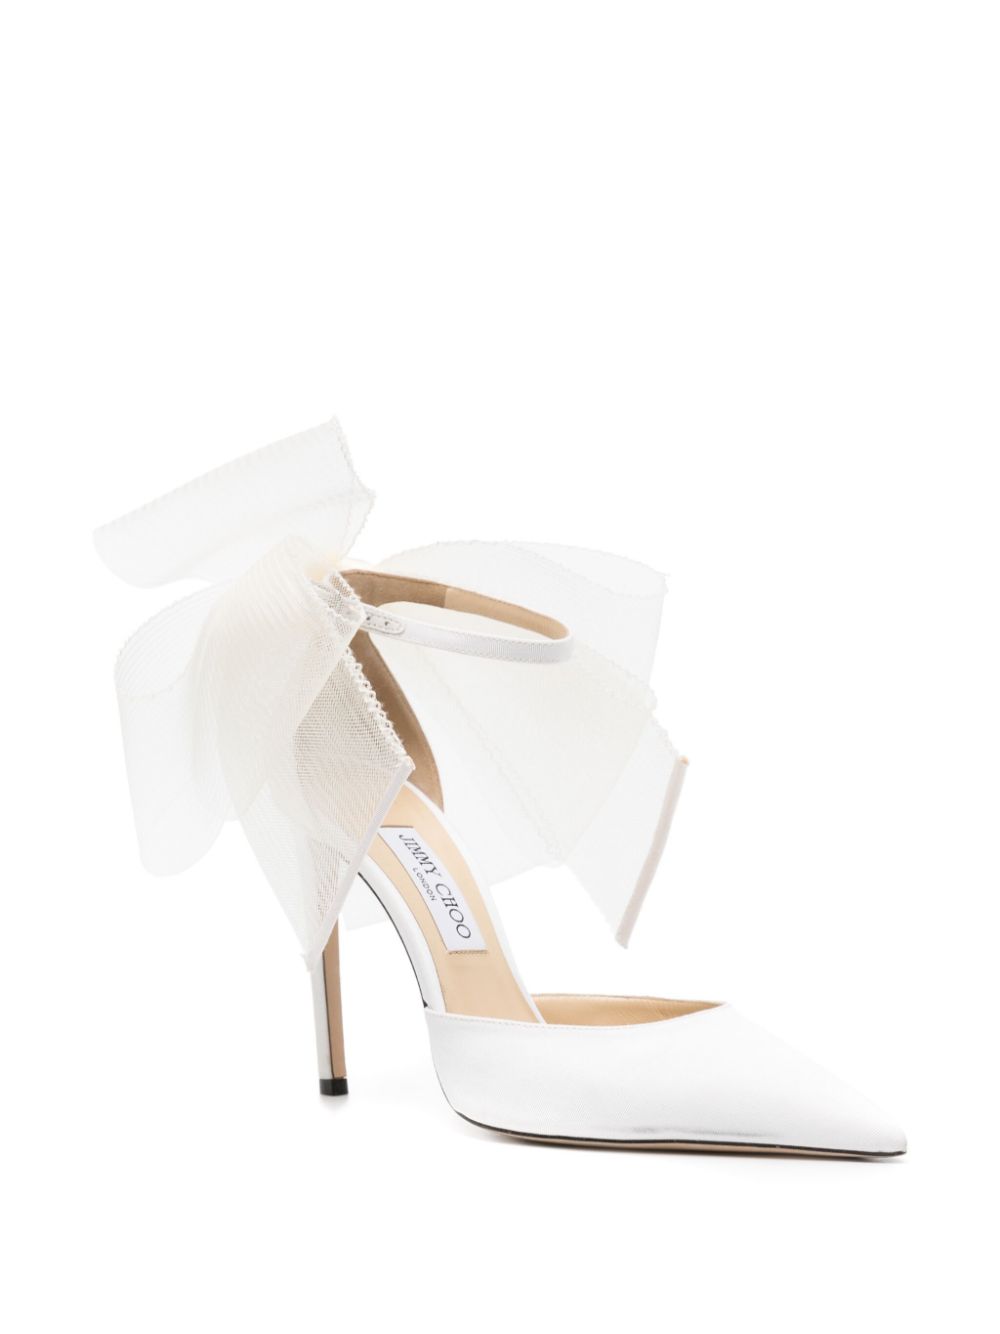 Pre-owned Jimmy Choo Averly 100mm Bow-detailed Pumps In Neutrals